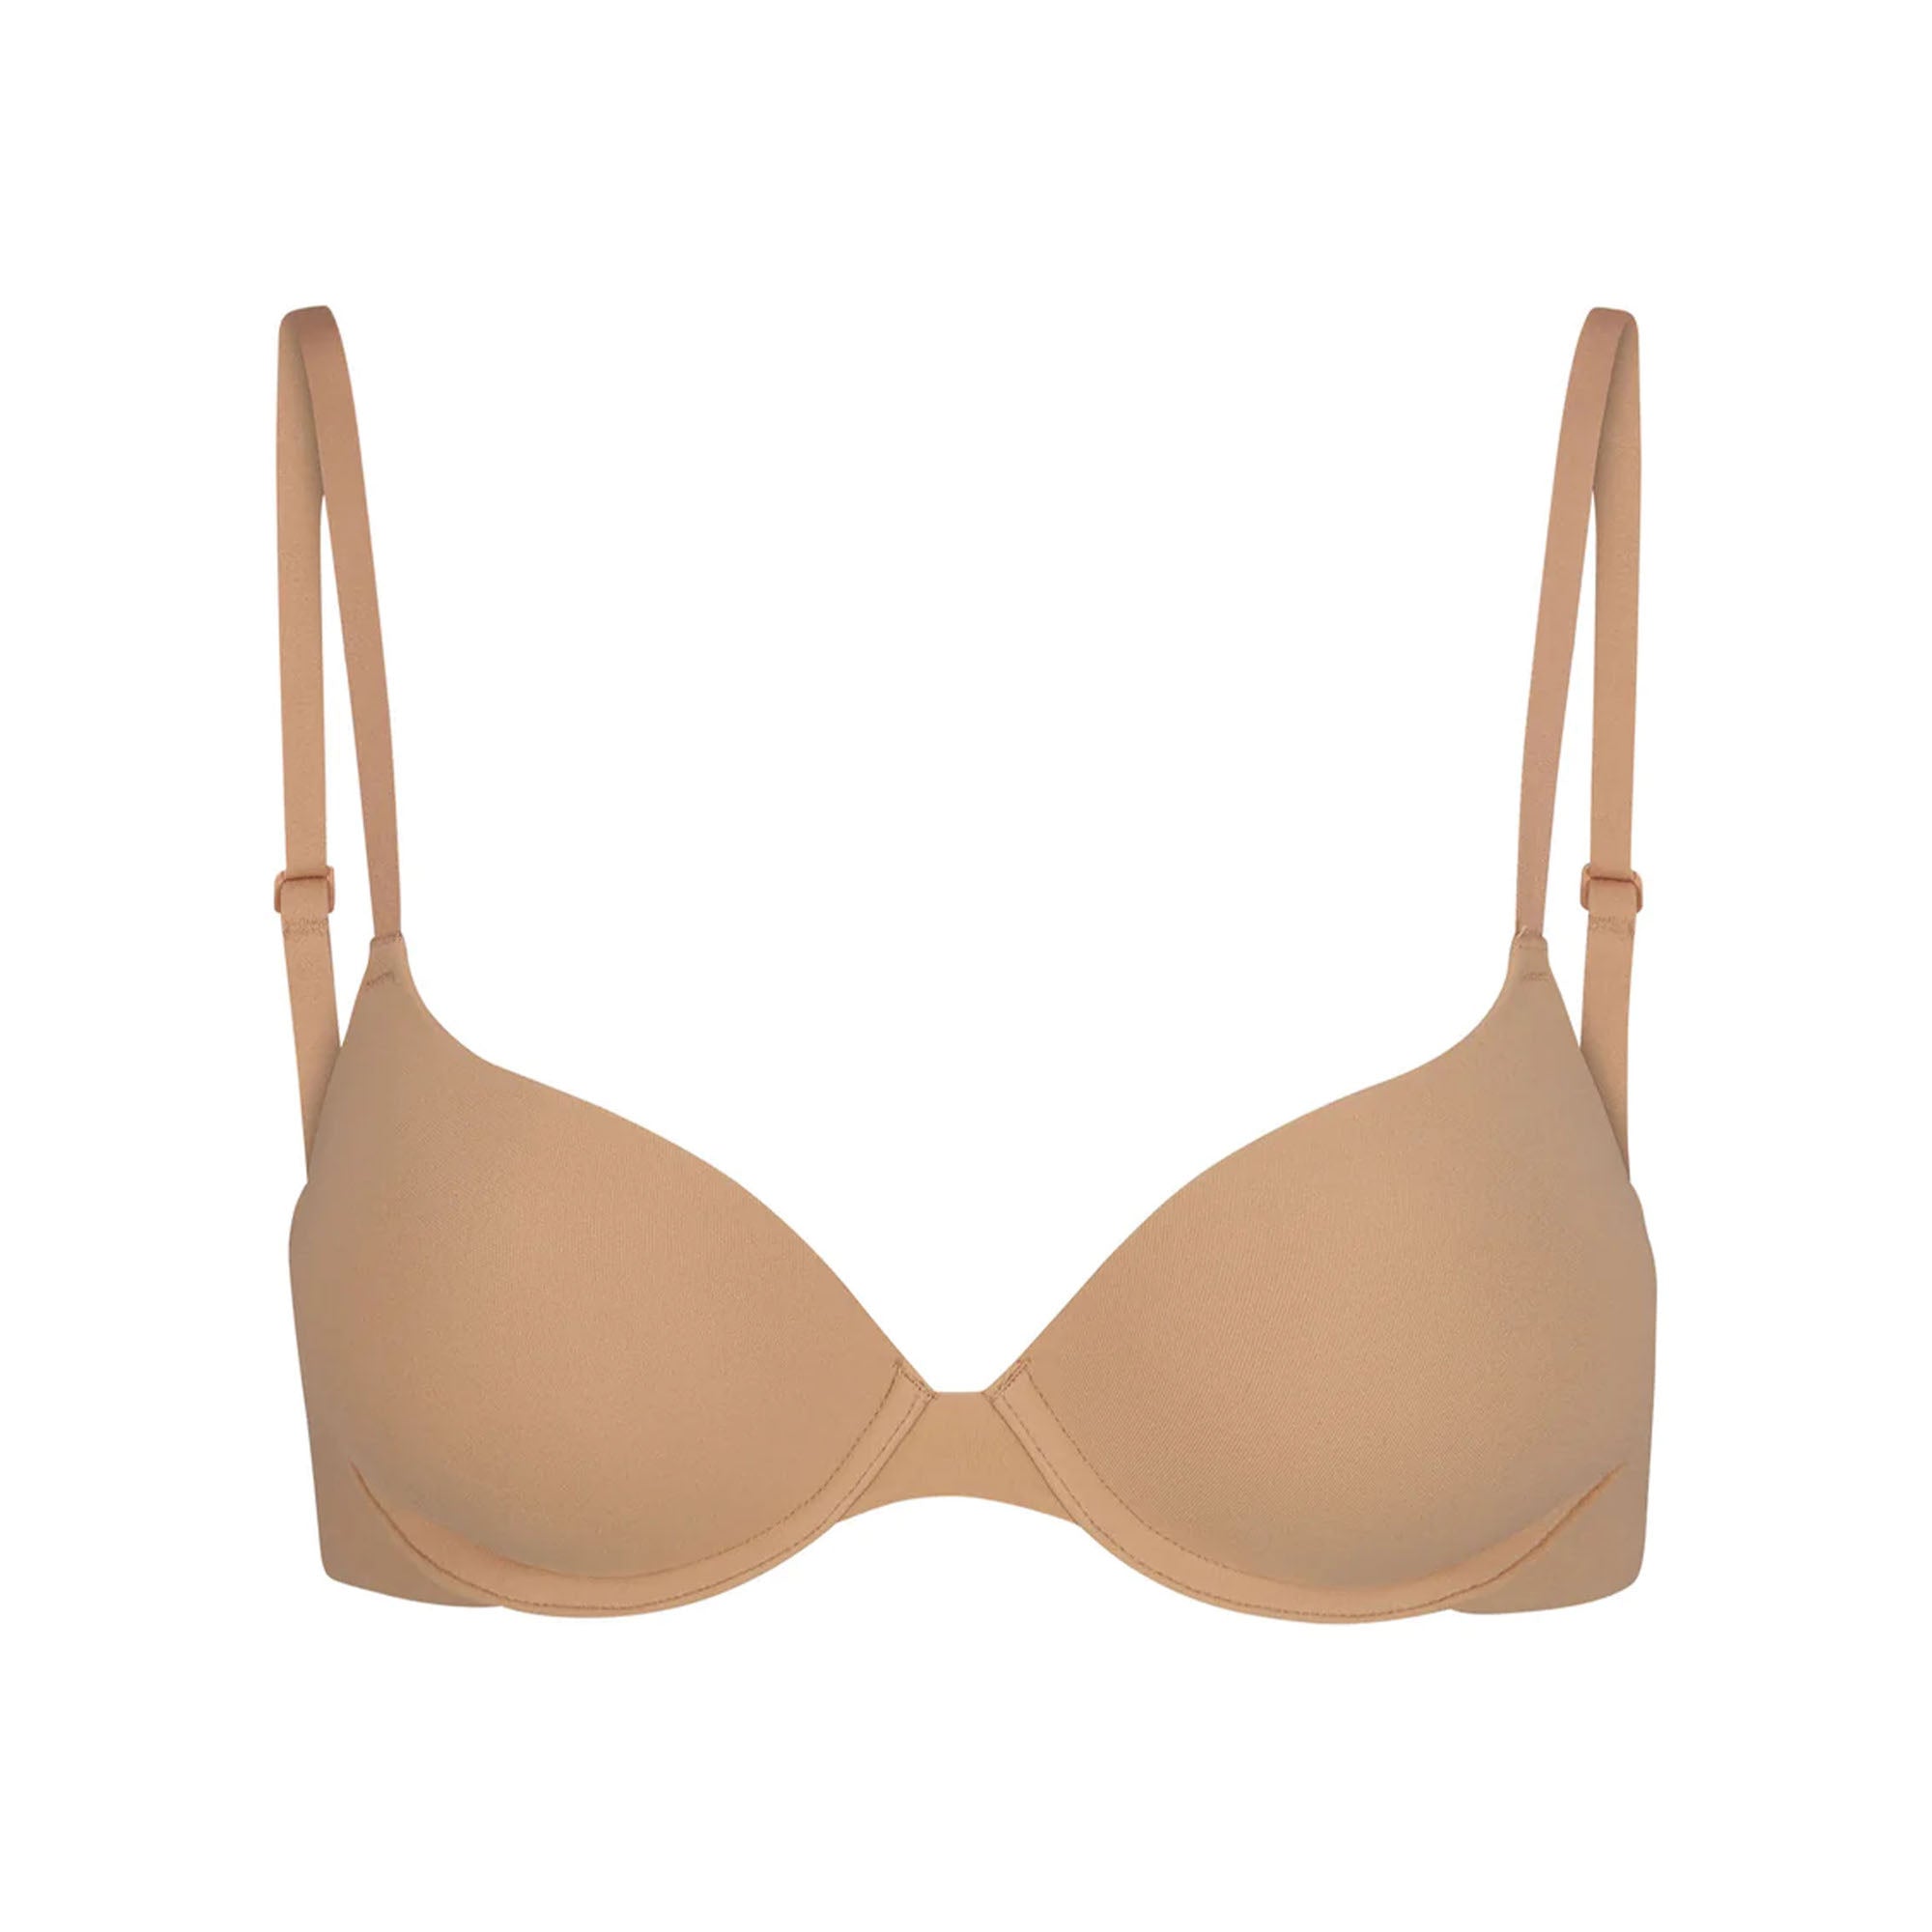 Skim inspired bras review.#musthaves #finds #